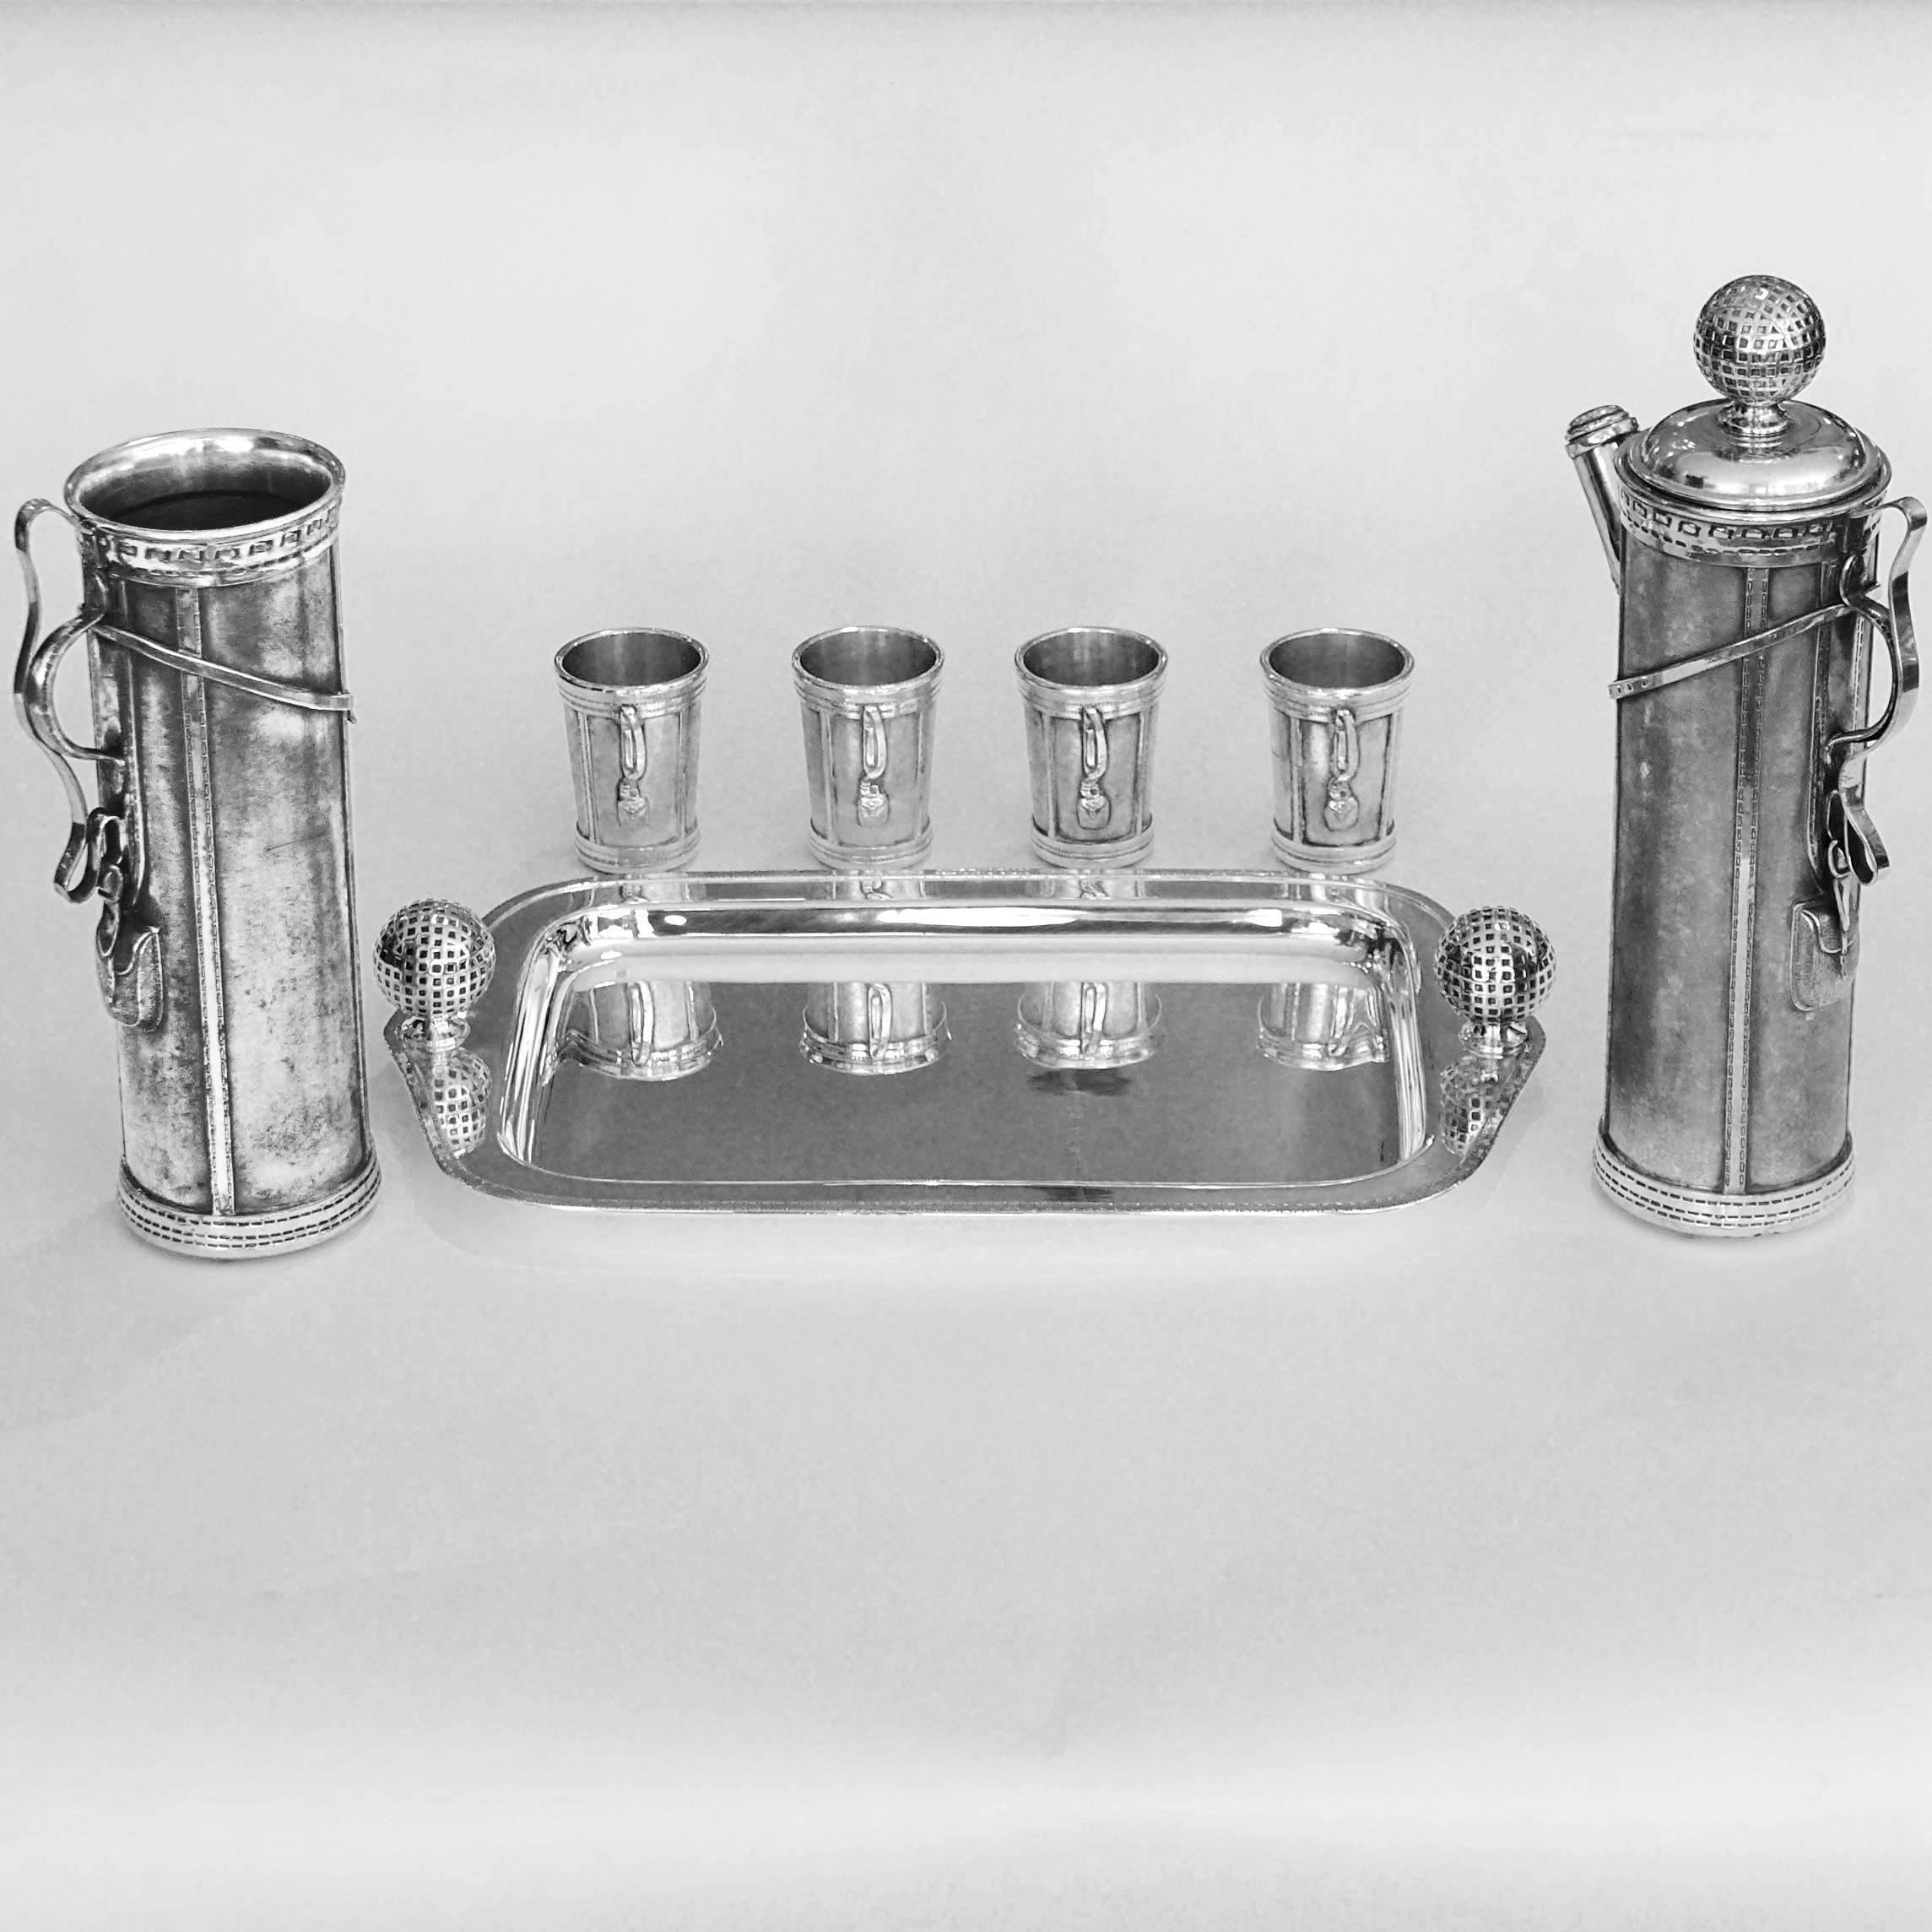 This is an original silver plated 1926 cocktail set manufactured by the American company, Derby Silver Company. Often described by historians as the first figural cocktail shaker, this set contains both the extremely rare cocktail pitcher, four cups